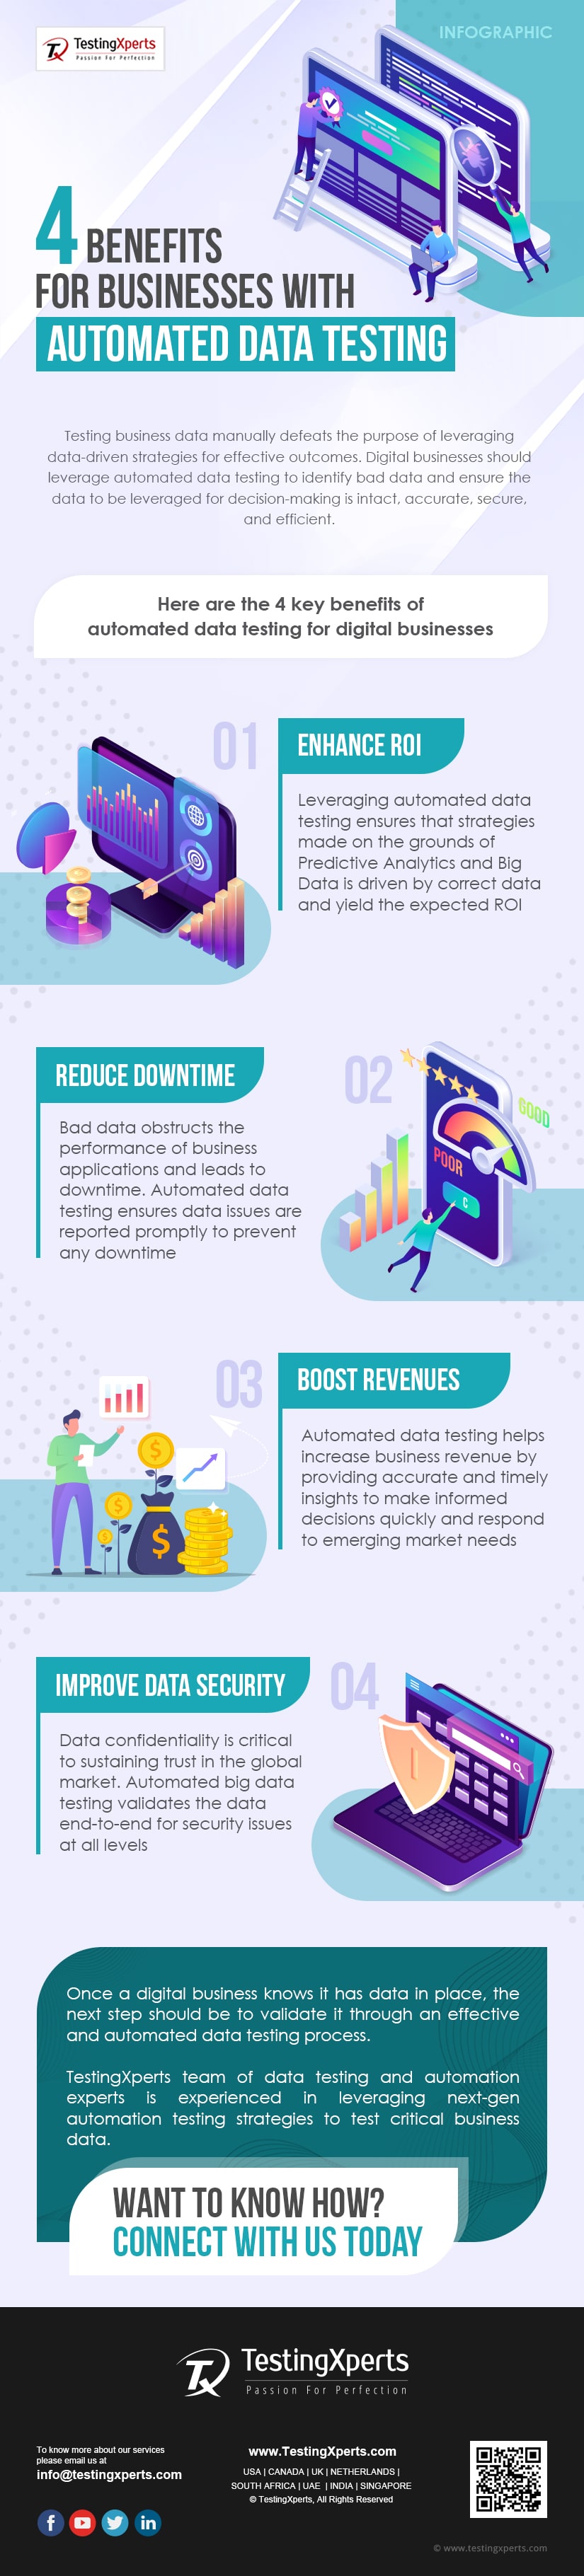 Benefits for Businesses with Automated Data Testing